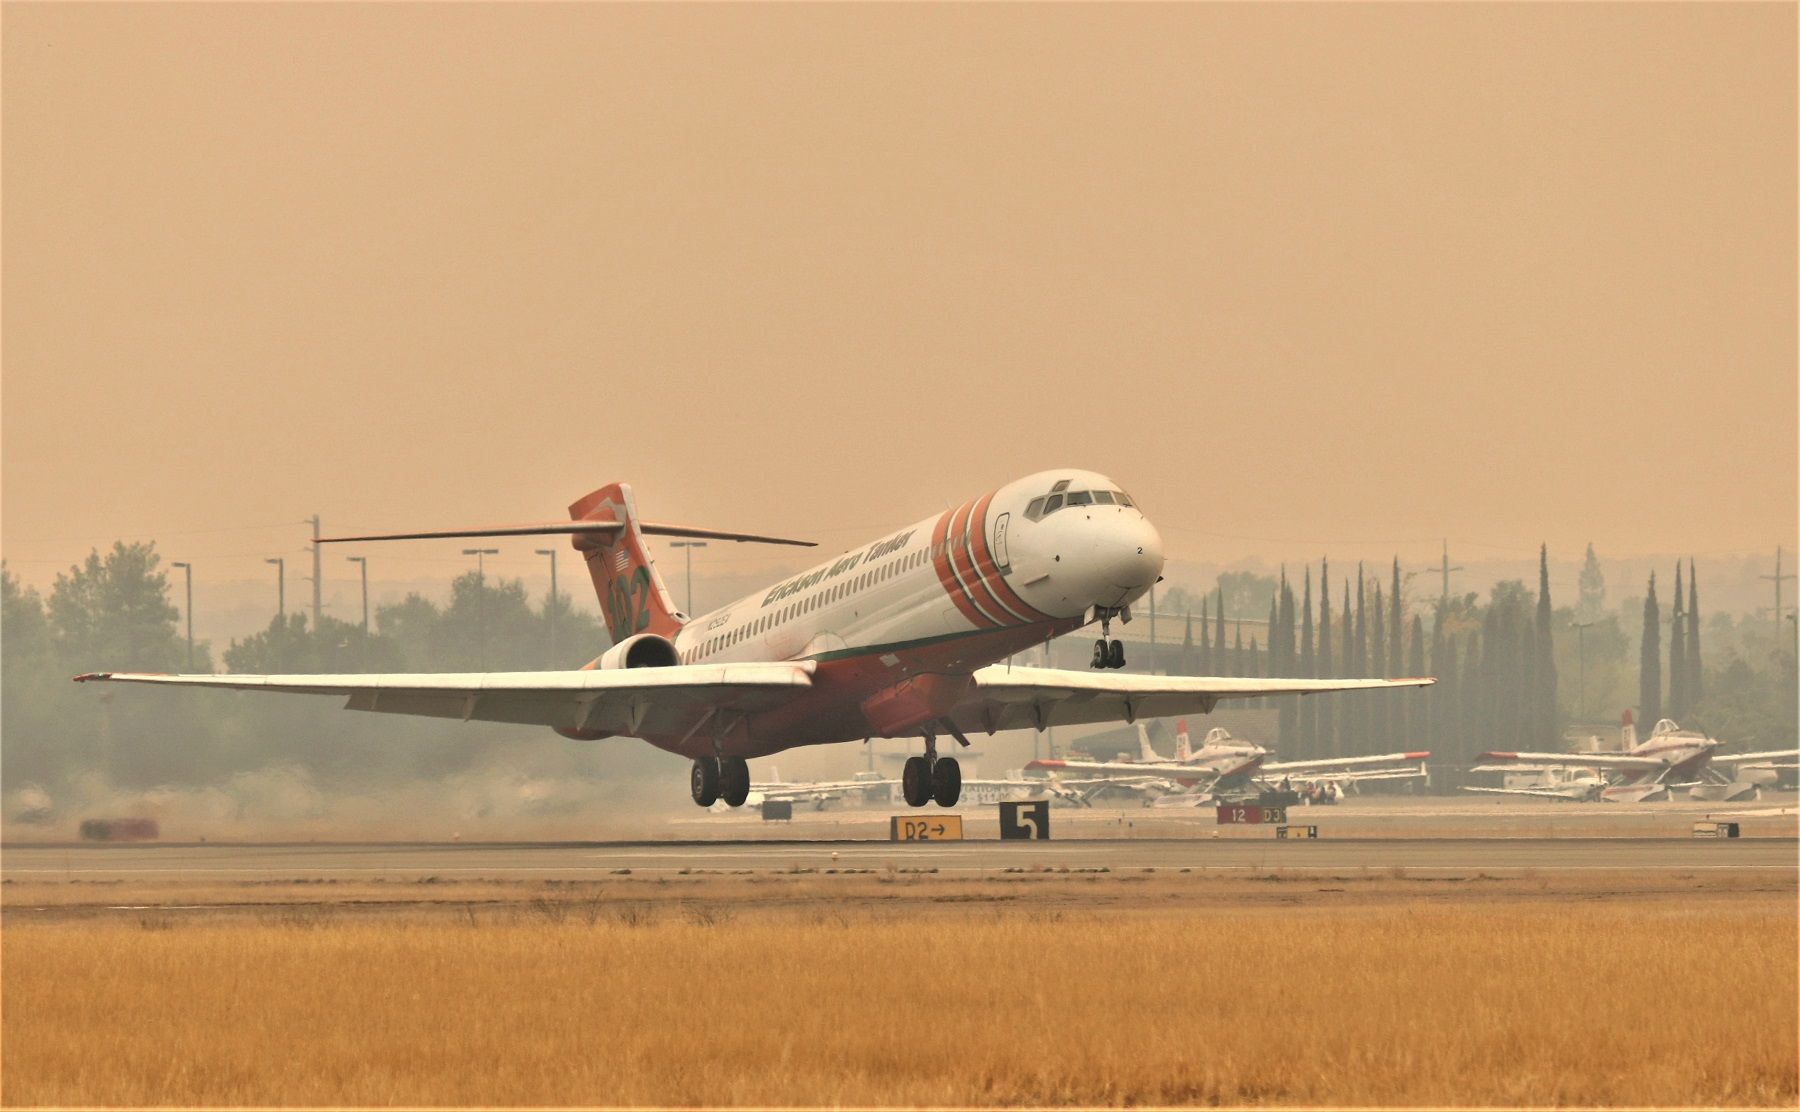 McDonnell Douglas MD-87 (N292EA) - KRDD Sept 29 2020 Erickson Aero Tanker 102 departing for the ZOGG Fire burning west of Redding CA USA The northern CA area was covered in smoke like this for most of 3 months this year 2020.